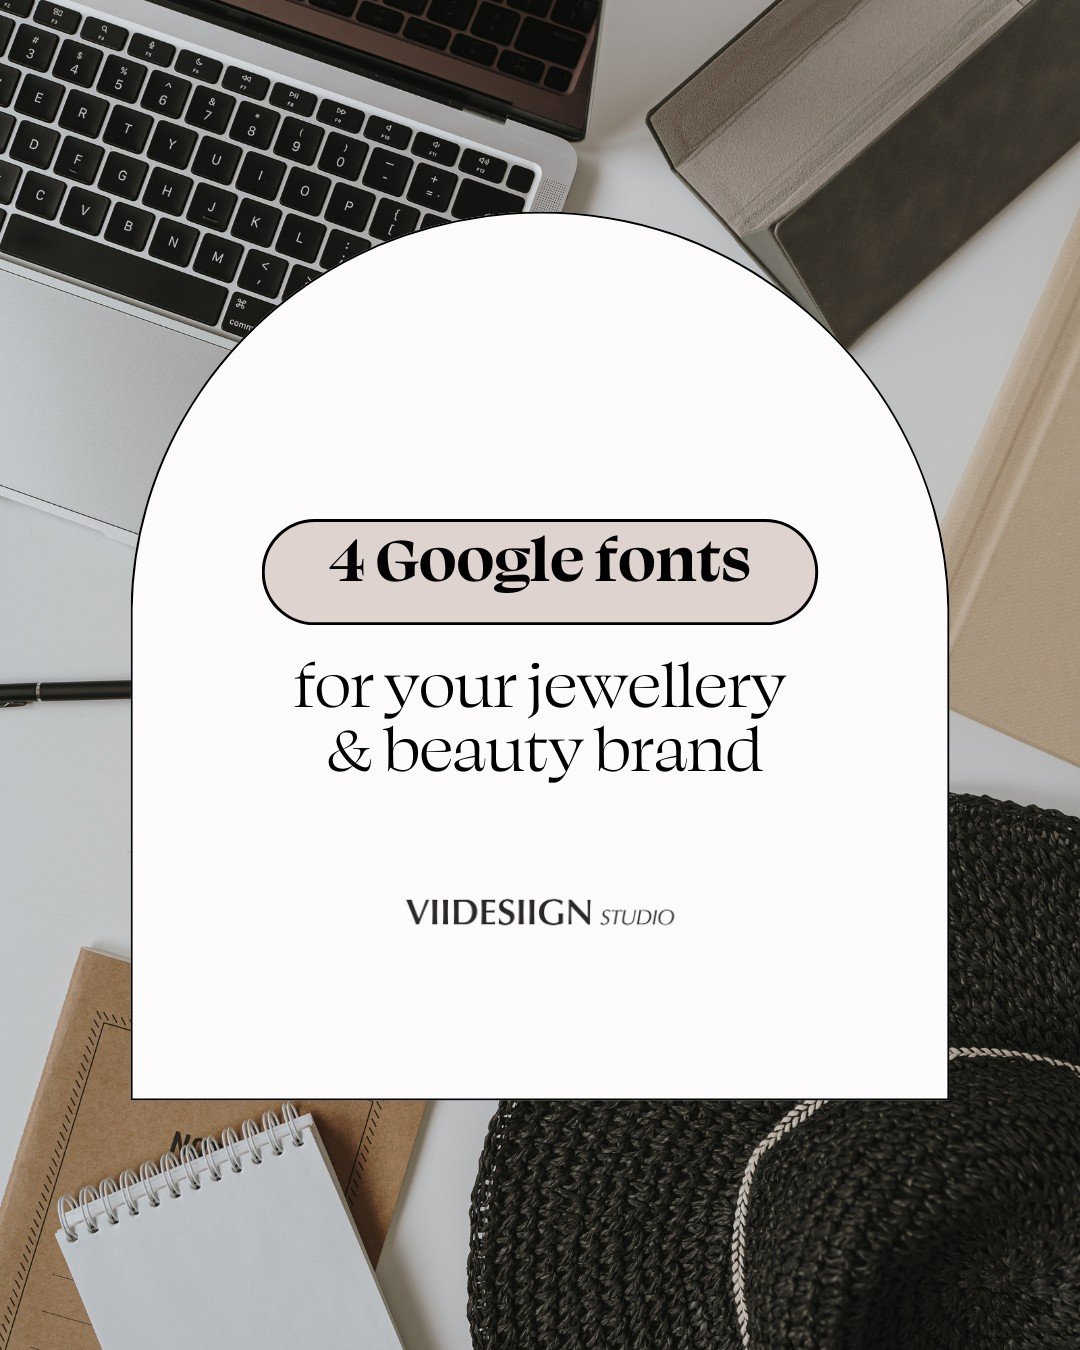 Your brand's fonts matter ✨

Timeless, vintage, bold, or chic? 

Choose the font that defines your jewellery brand.

&darr; Share your pick and inspire fellow entrepreneurs.

.

.

.

.

.

.

.

.

.

.

.

#typographyideas #typographyinspiration💎 